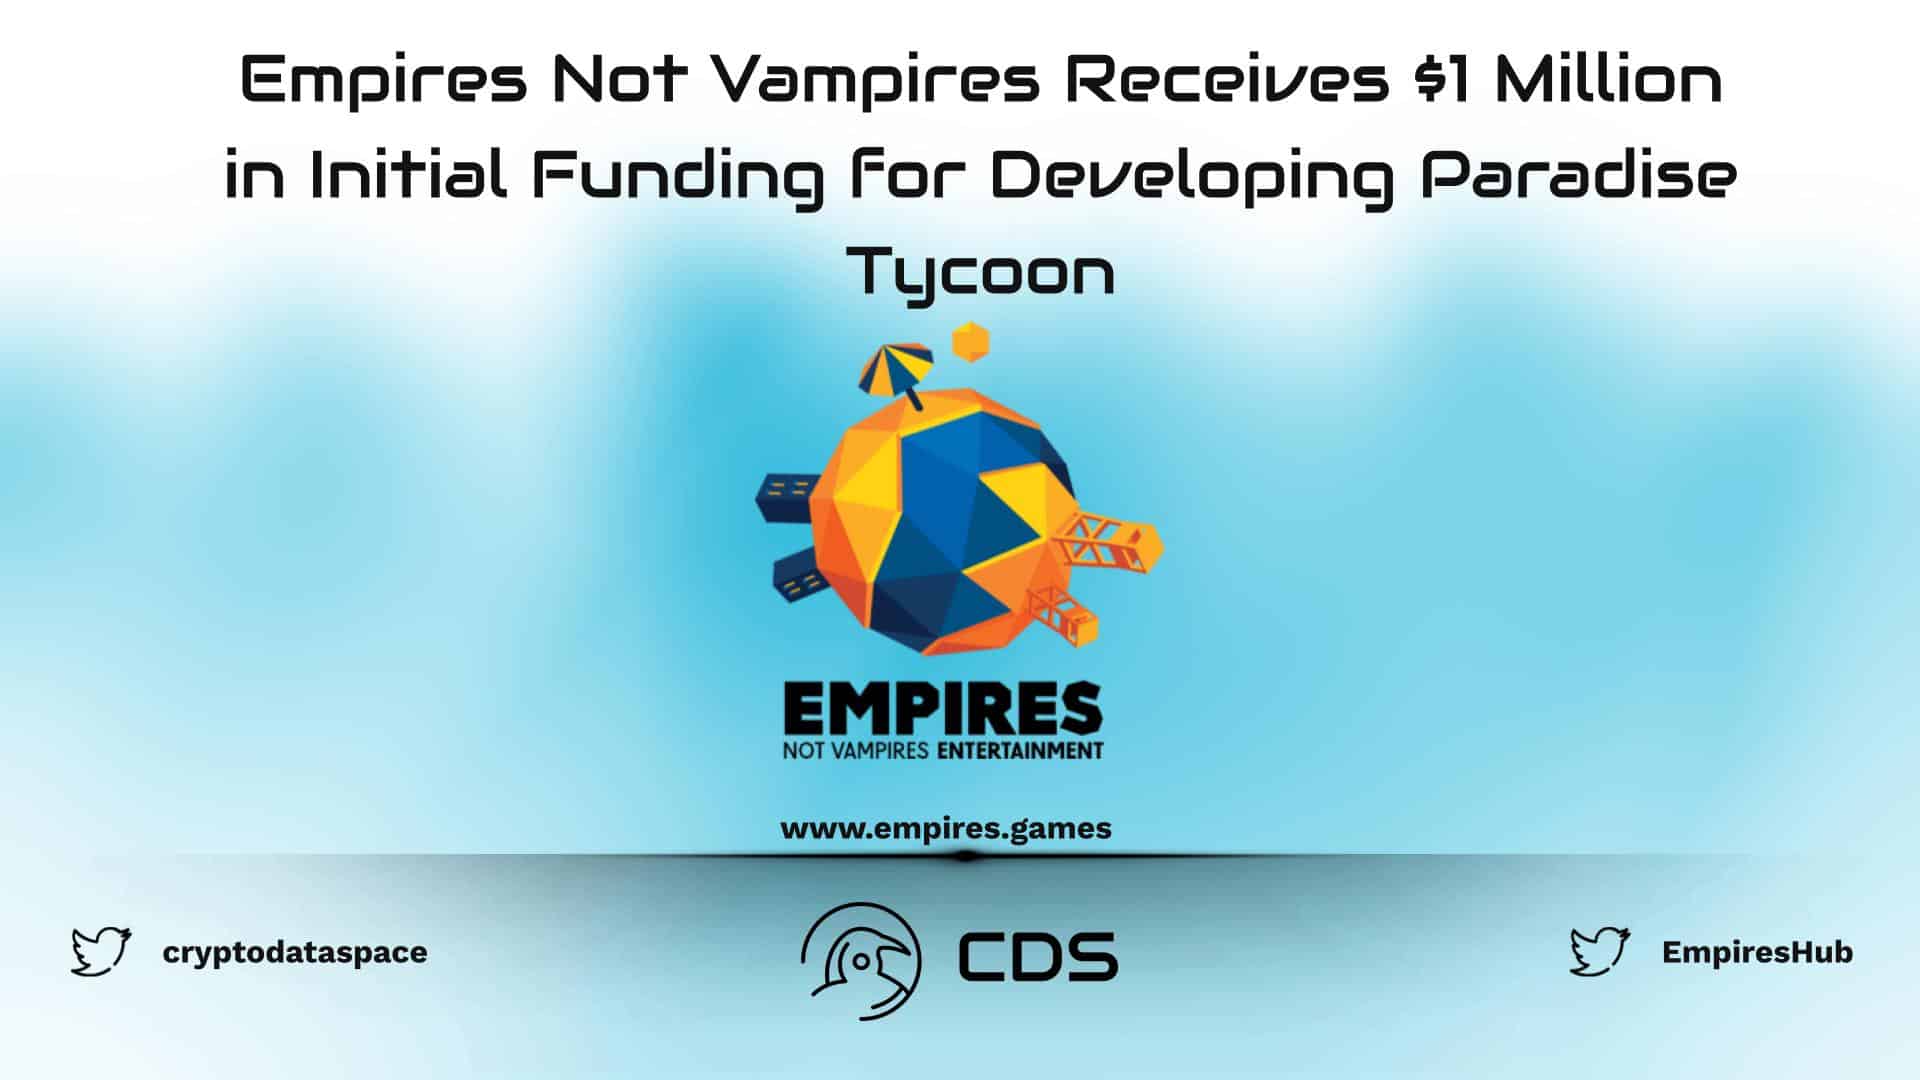 Empires Not Vampires Receives $1 Million in Initial Funding for Developing Paradise Tycoon